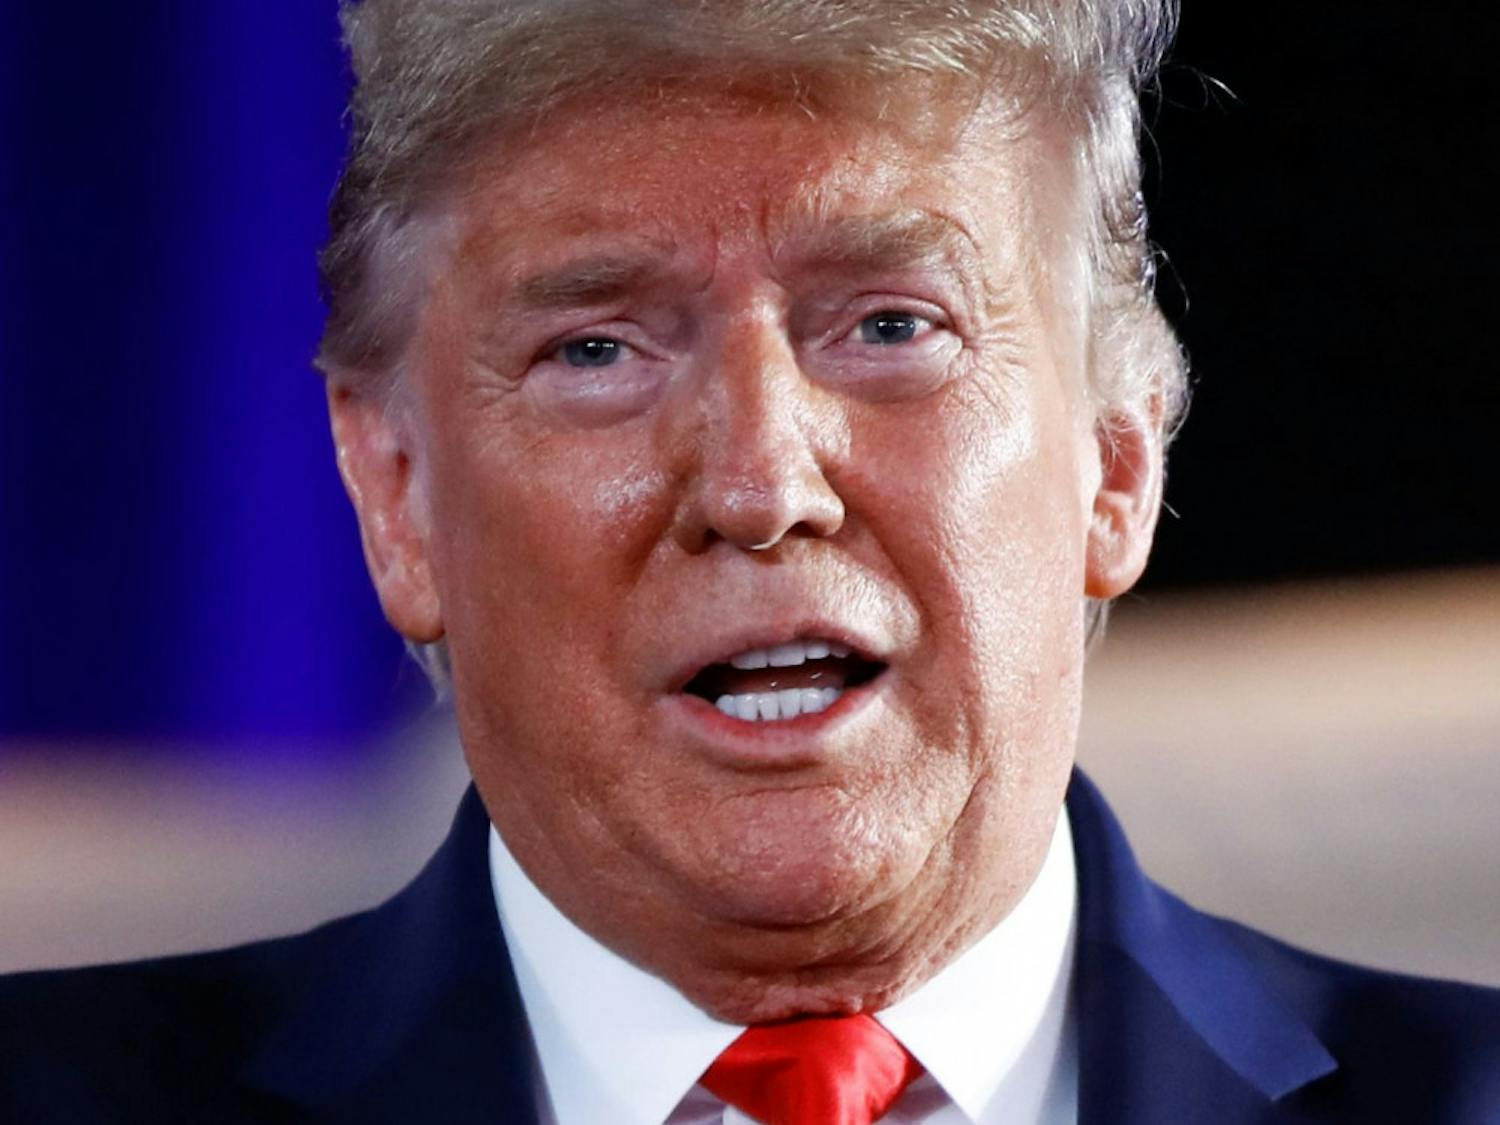 President Donald Trump takes part in a FOX News Channel Town Hall, co-moderated by FNC's chief political anchor Bret Baier of Special Report and The Story anchor Martha MacCallum, in Scranton, Pa., Thursday, March 5, 2020. (AP Photo/Matt Rourke)